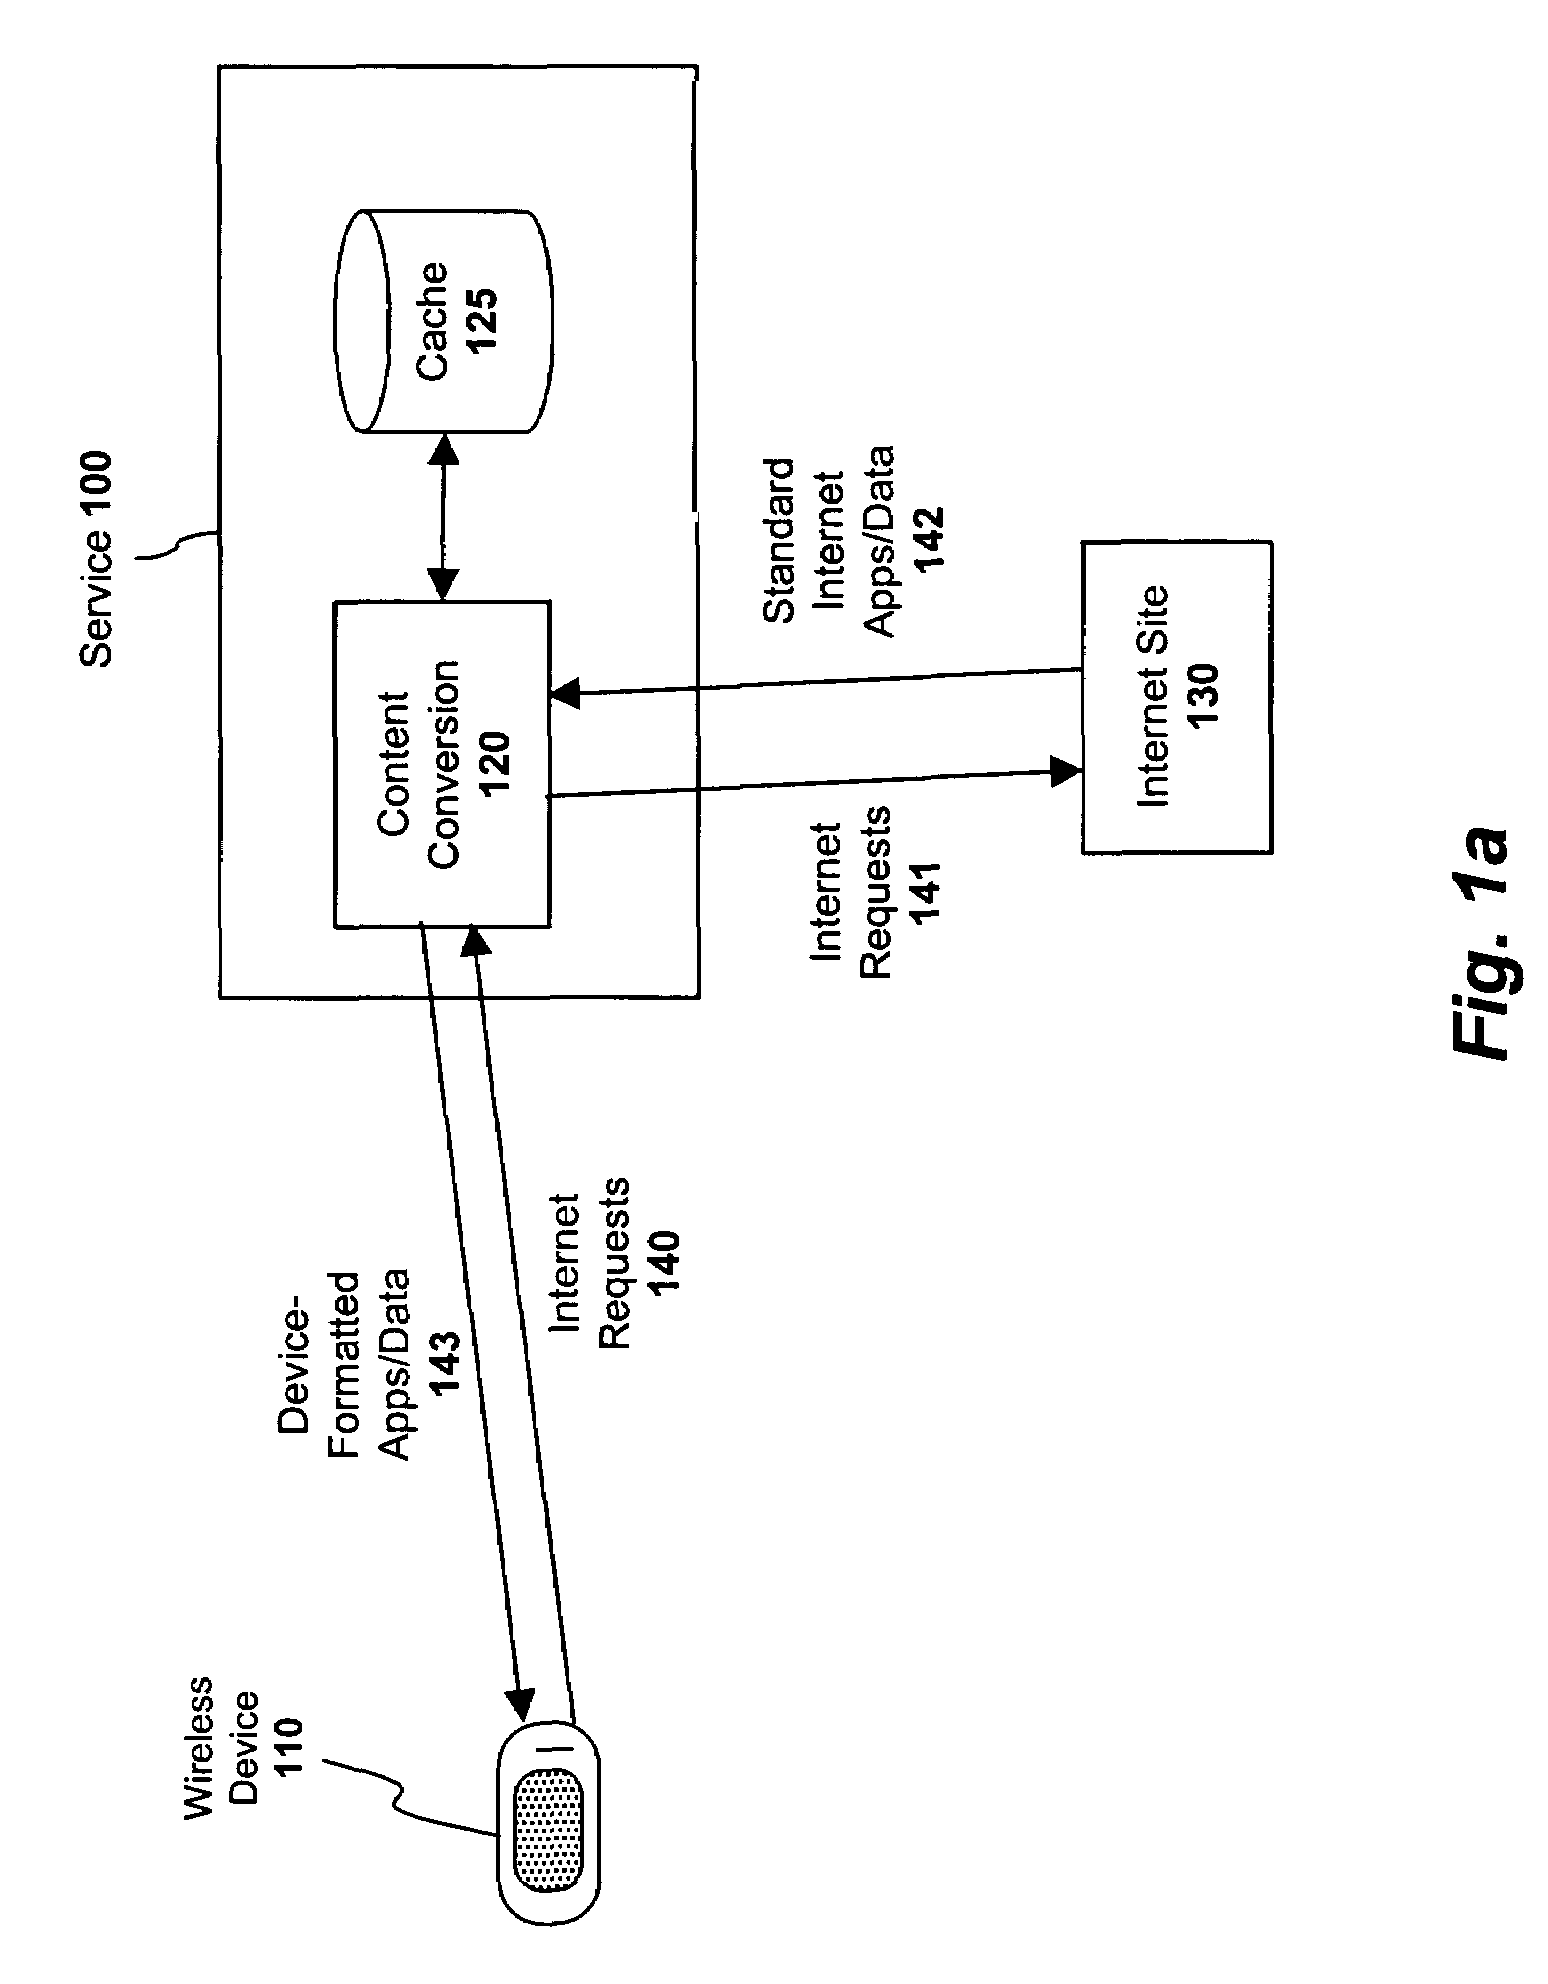 Multi-mode communication apparatus and interface for contacting a user